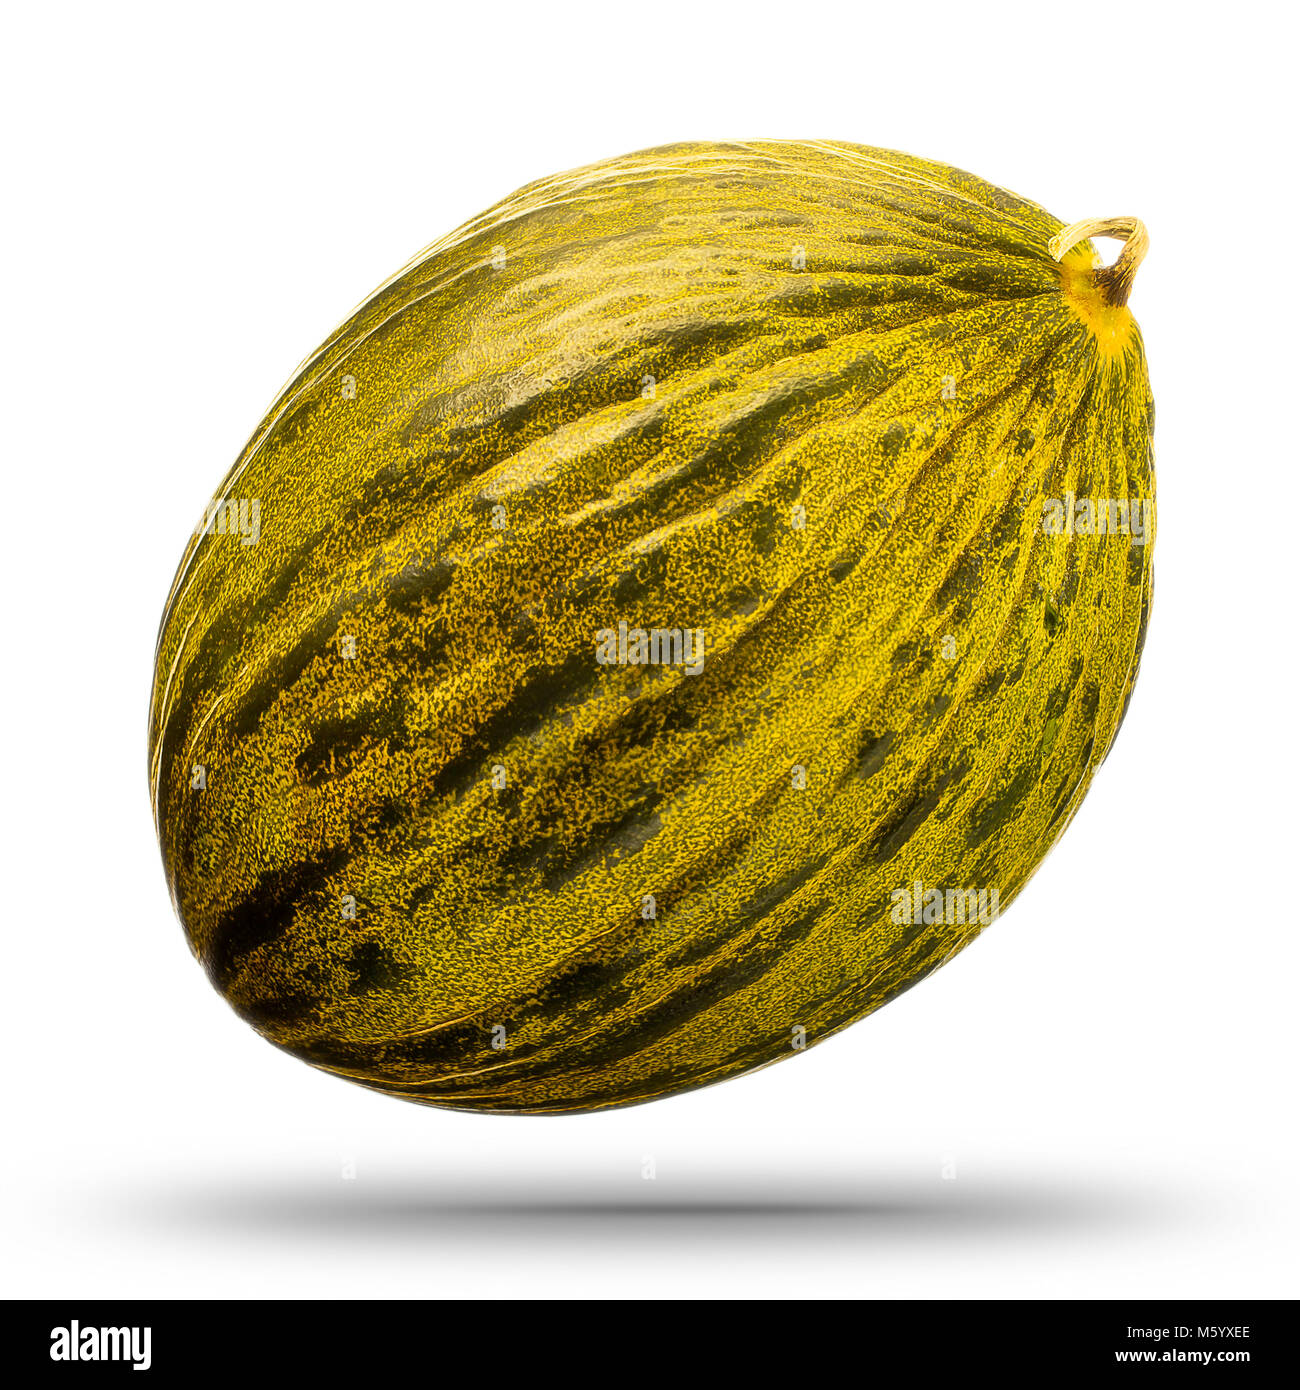 Golden yellow melon Cut Out Stock Images & Pictures - Alamy